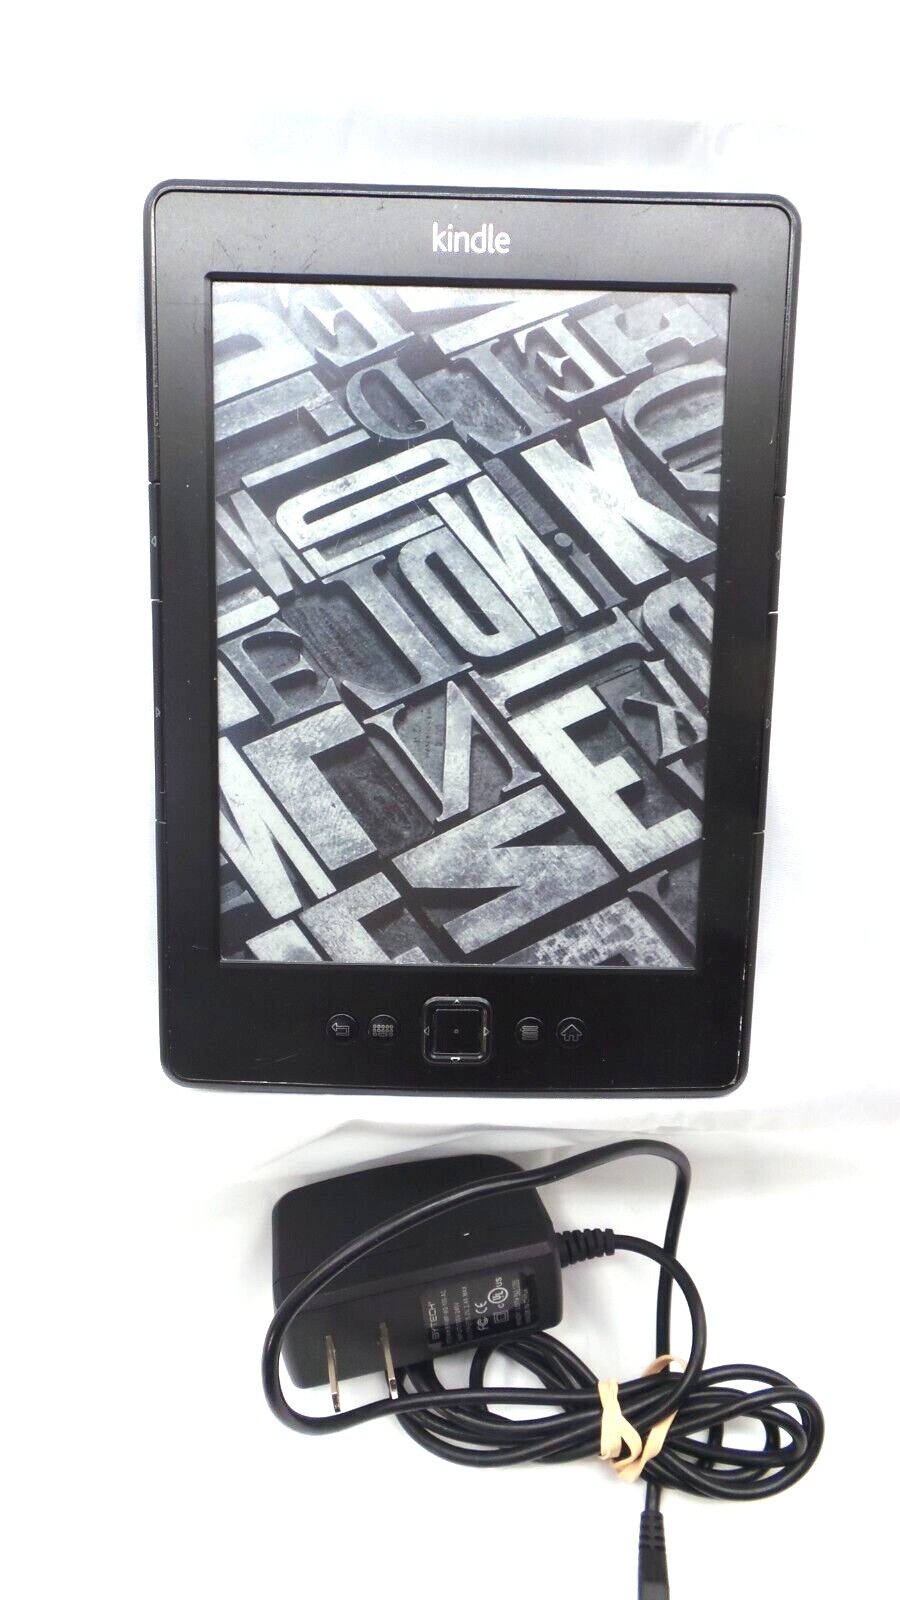 Amazon Kindle 4th Generation D01100 2GB WiFi e-reader Tested an set to factory